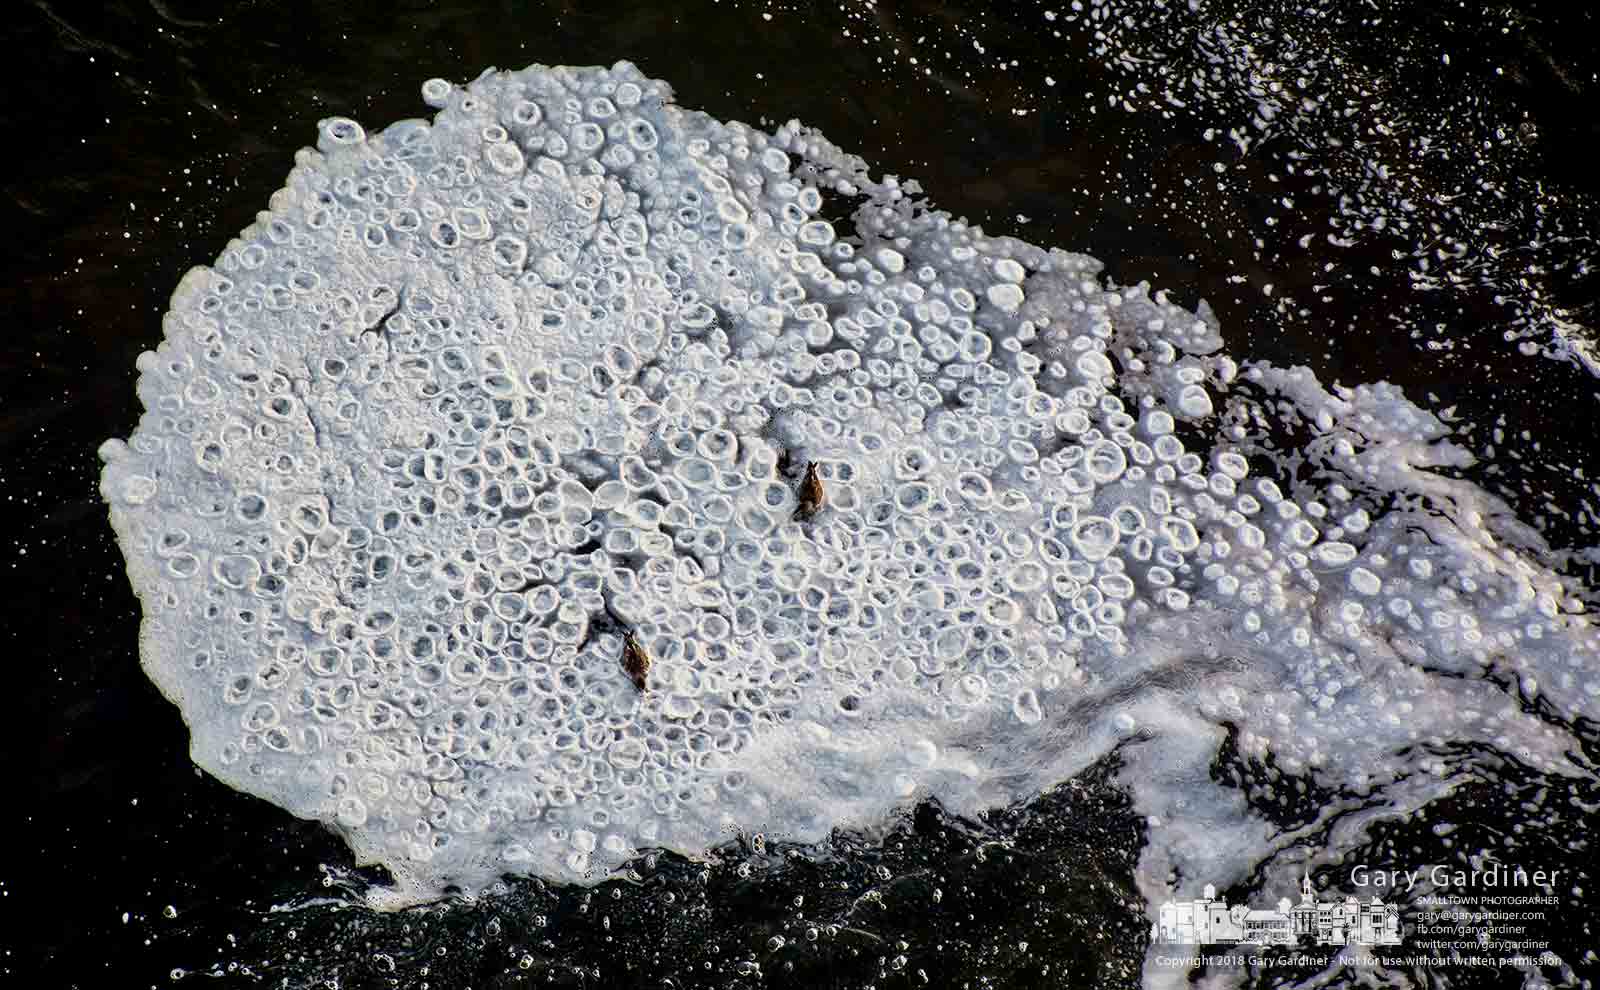 A pair of waterfowl navigate their way through ice circles and foam looking for food in the eddy below Hoover Dam. My Final Photo for Jan. 4, 2018.